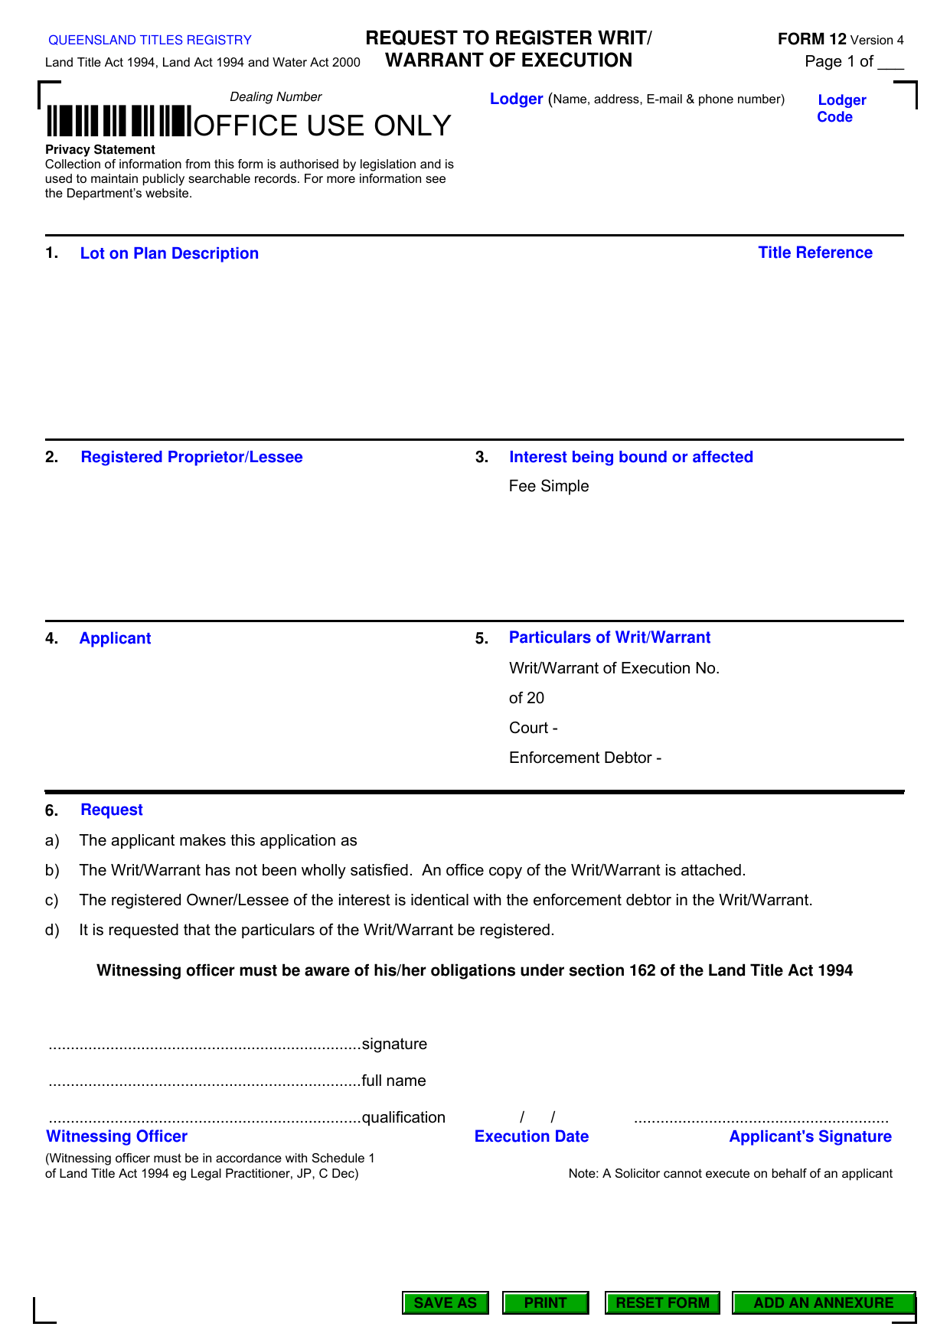 Form 12 Request to Register Writ/ Warrant of Execution - Queensland, Australia, Page 1